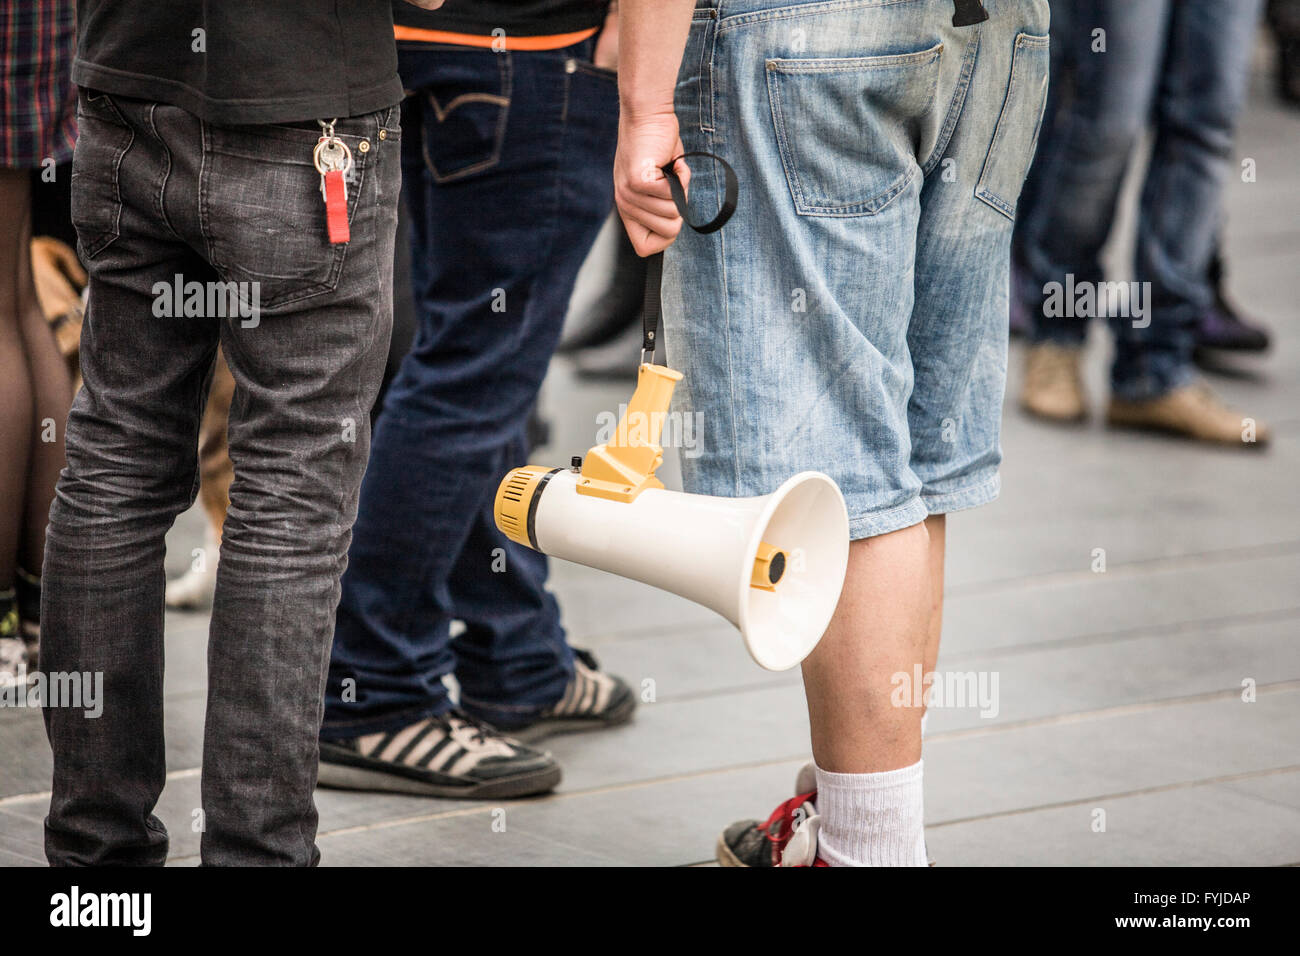 young demonstrator with megaphone protesting against austerity cuts Stock Photo